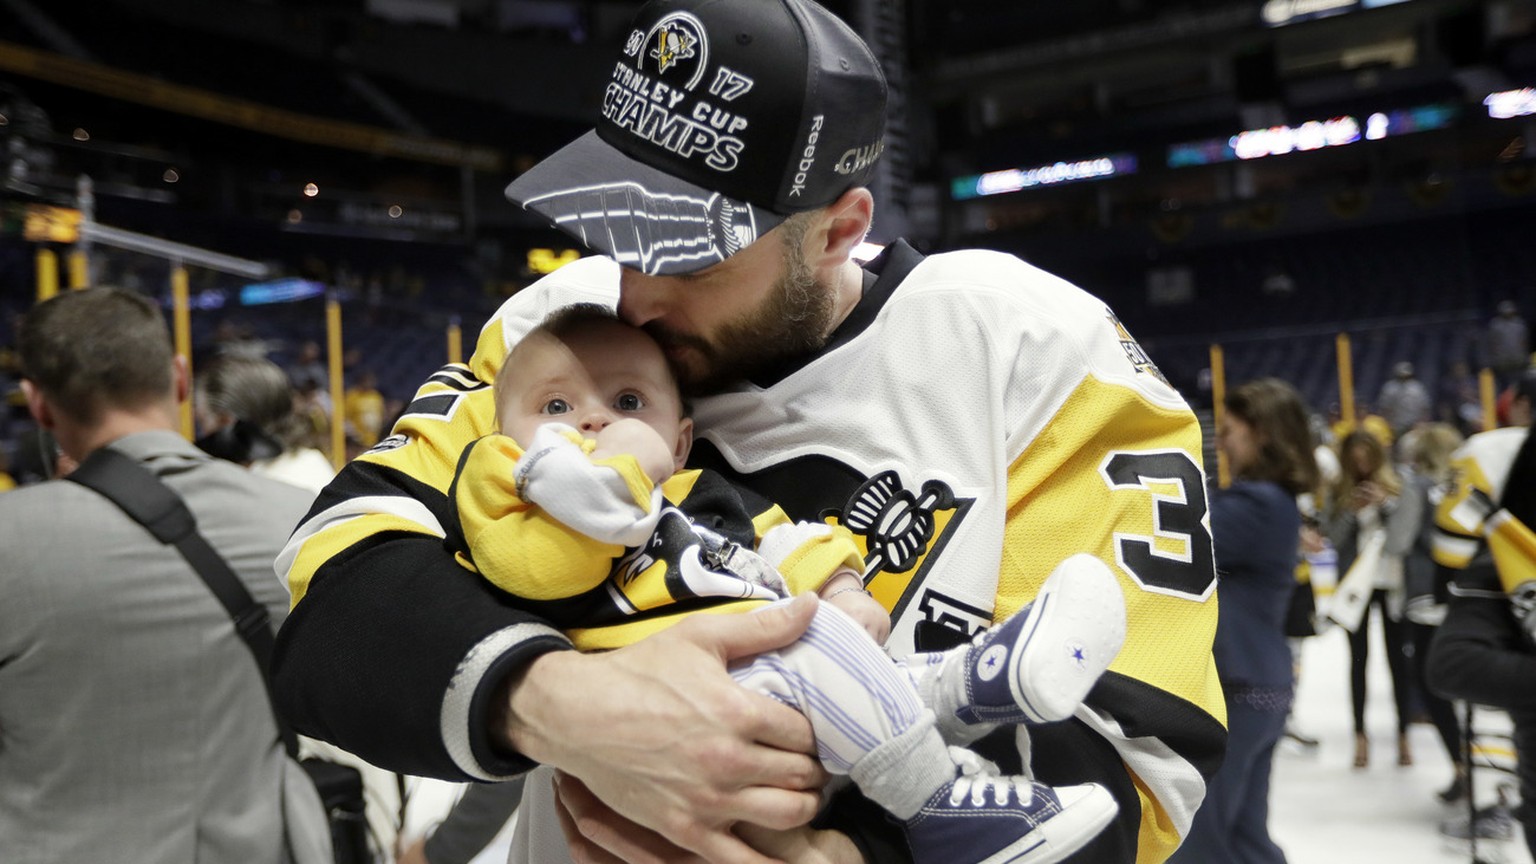 Pittsburgh Penguins defenseman Mark Streit, of Switzerland, kisses his daughter, Victoria, 5 months old, after the Penguins defeated the Nashville Predators 2-0 to win Game 6 of the NHL hockey Stanley ...